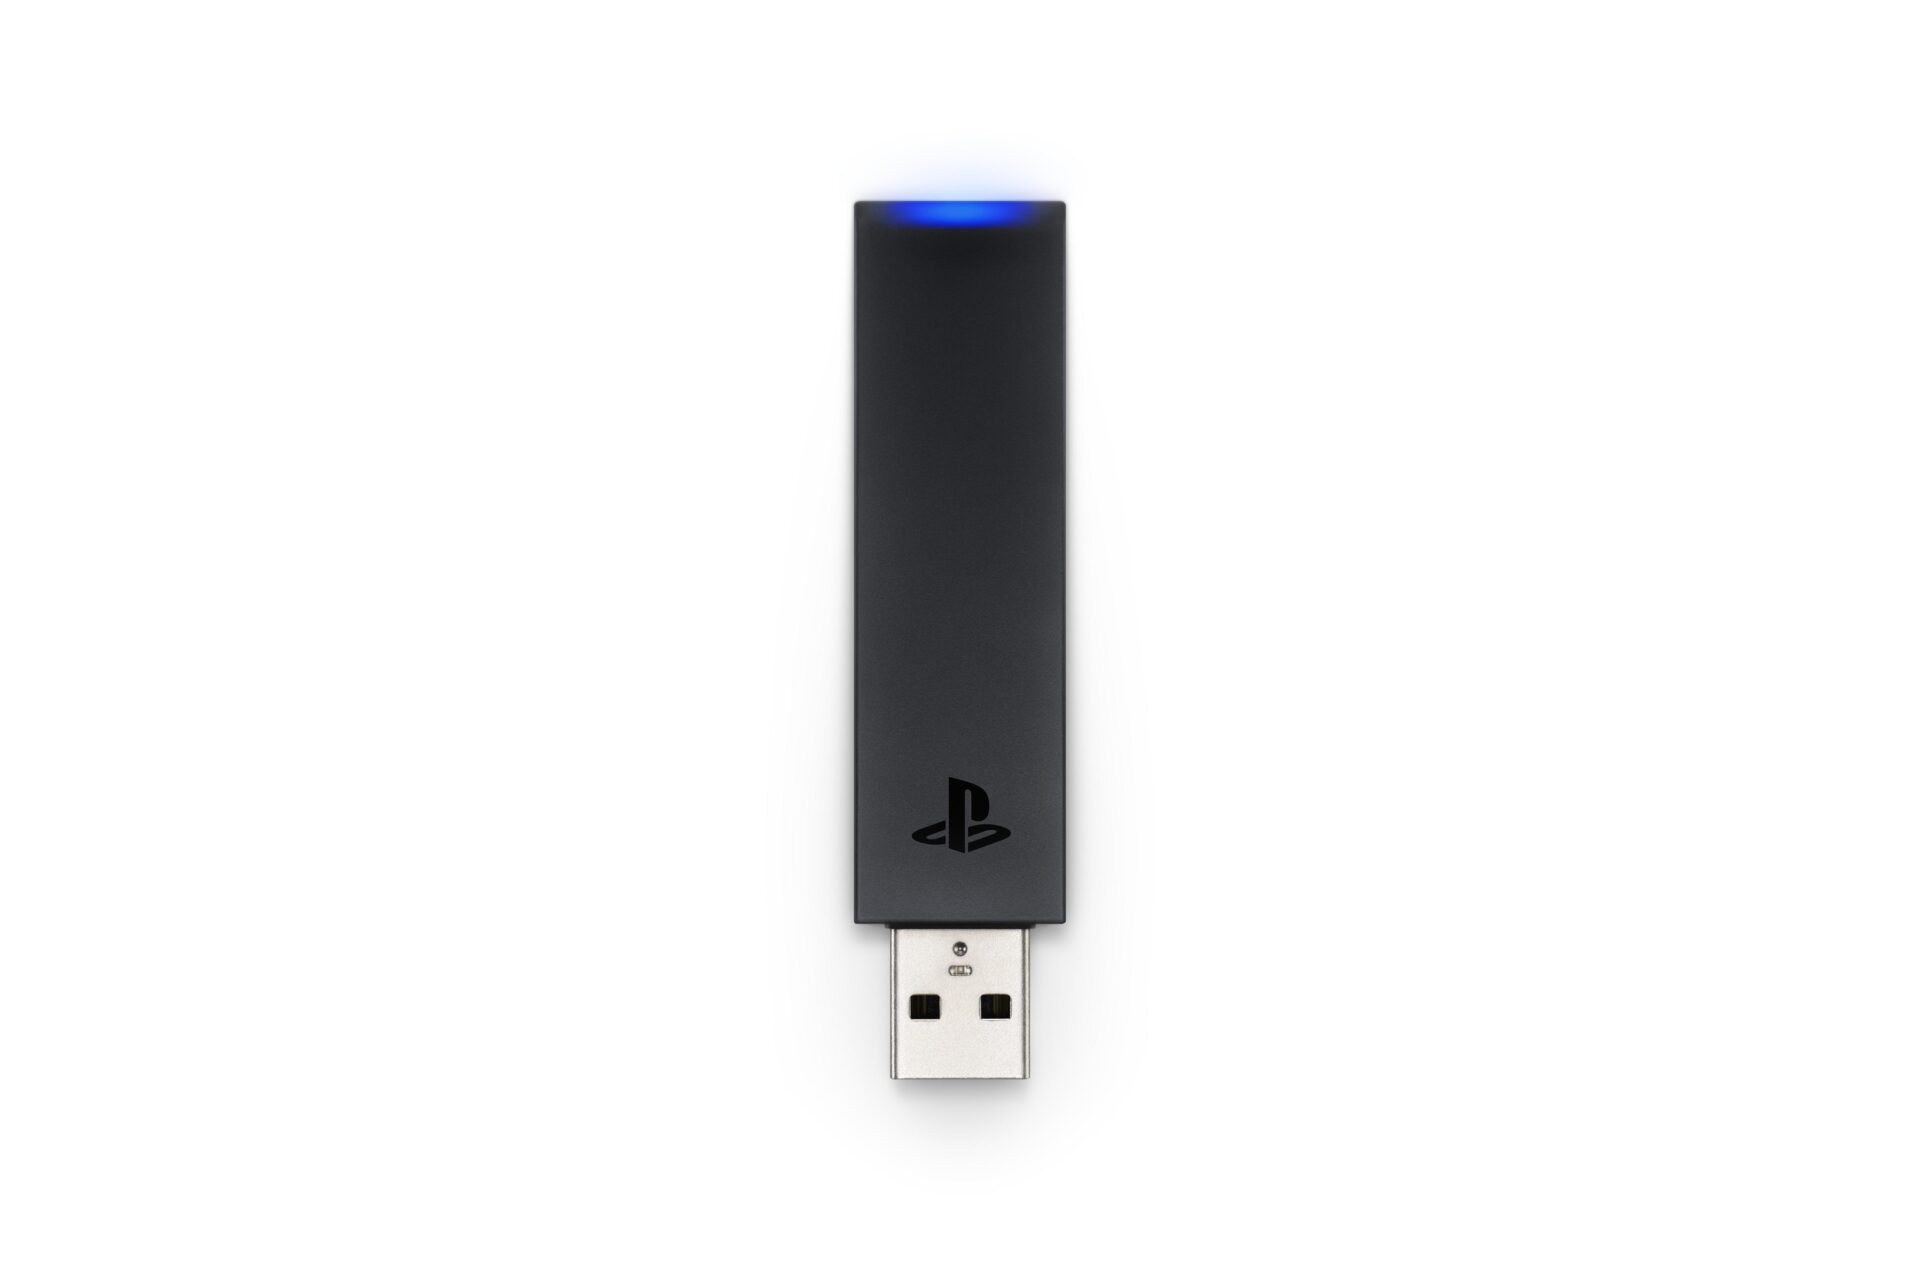 sony playstation dual shock 4 usb wireless adapter for pc